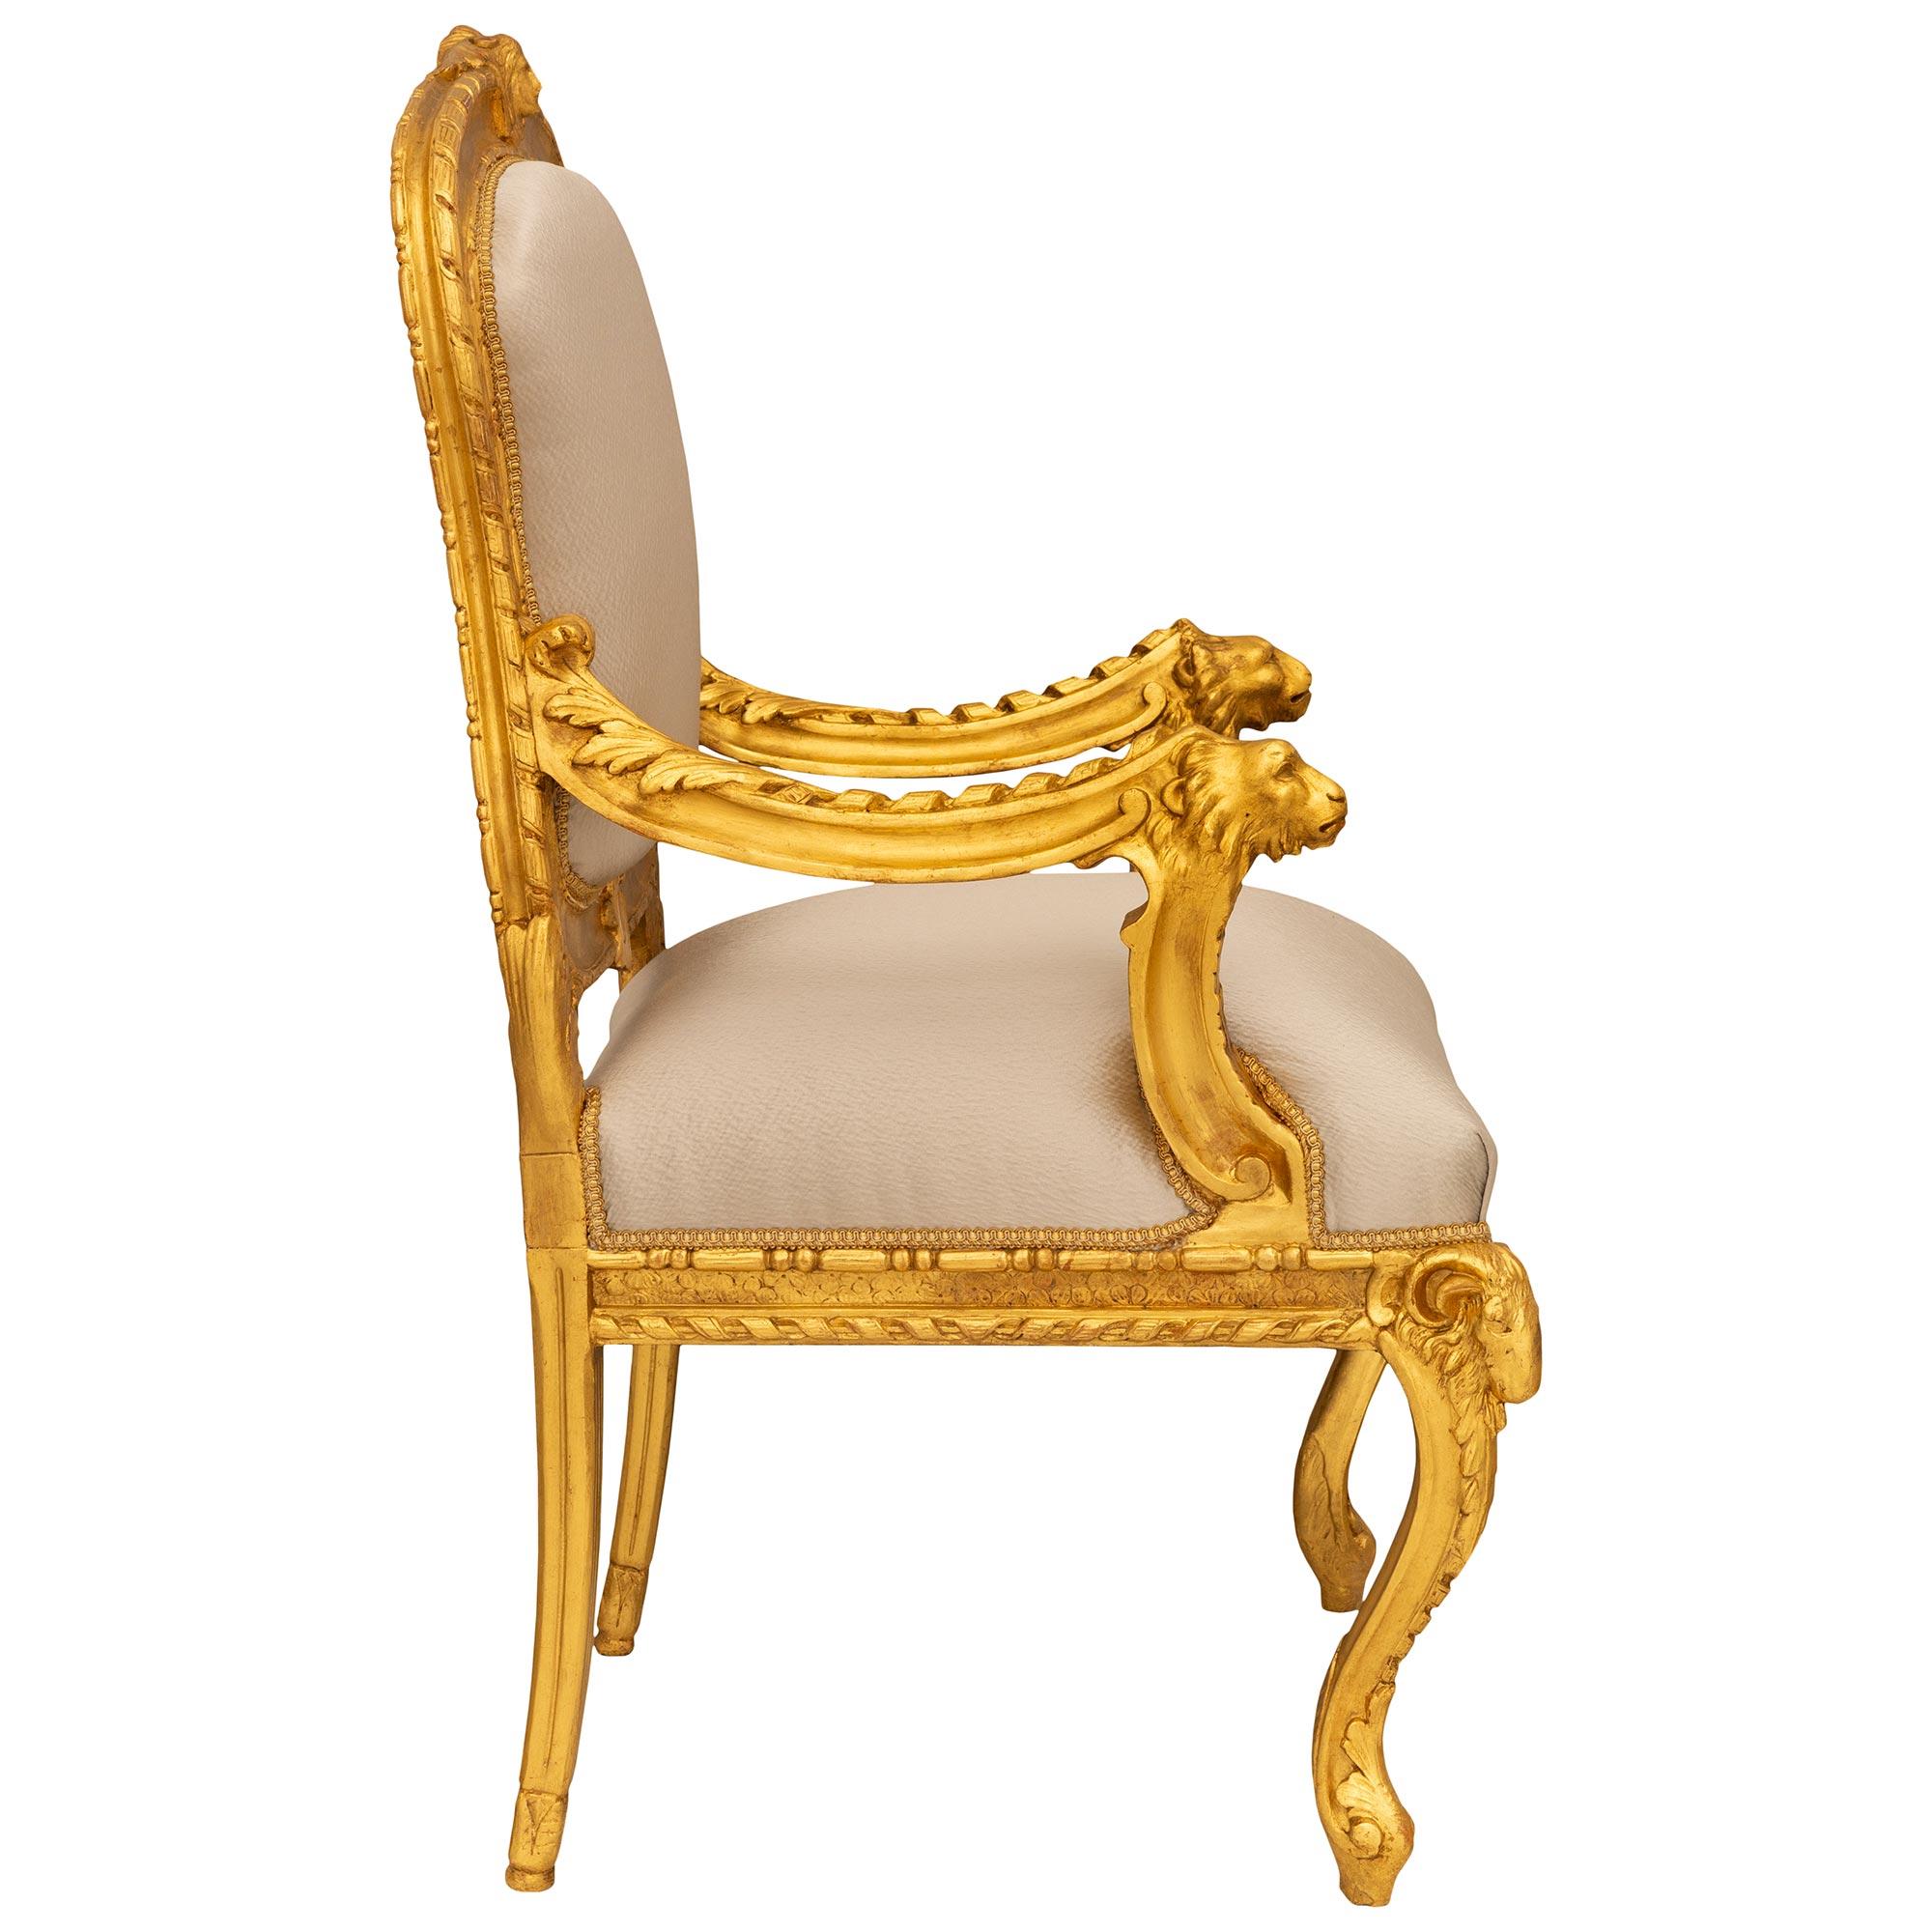 Pair Of Italian Early 18th Century Baroque Period Giltwood Armchairs In Good Condition For Sale In West Palm Beach, FL